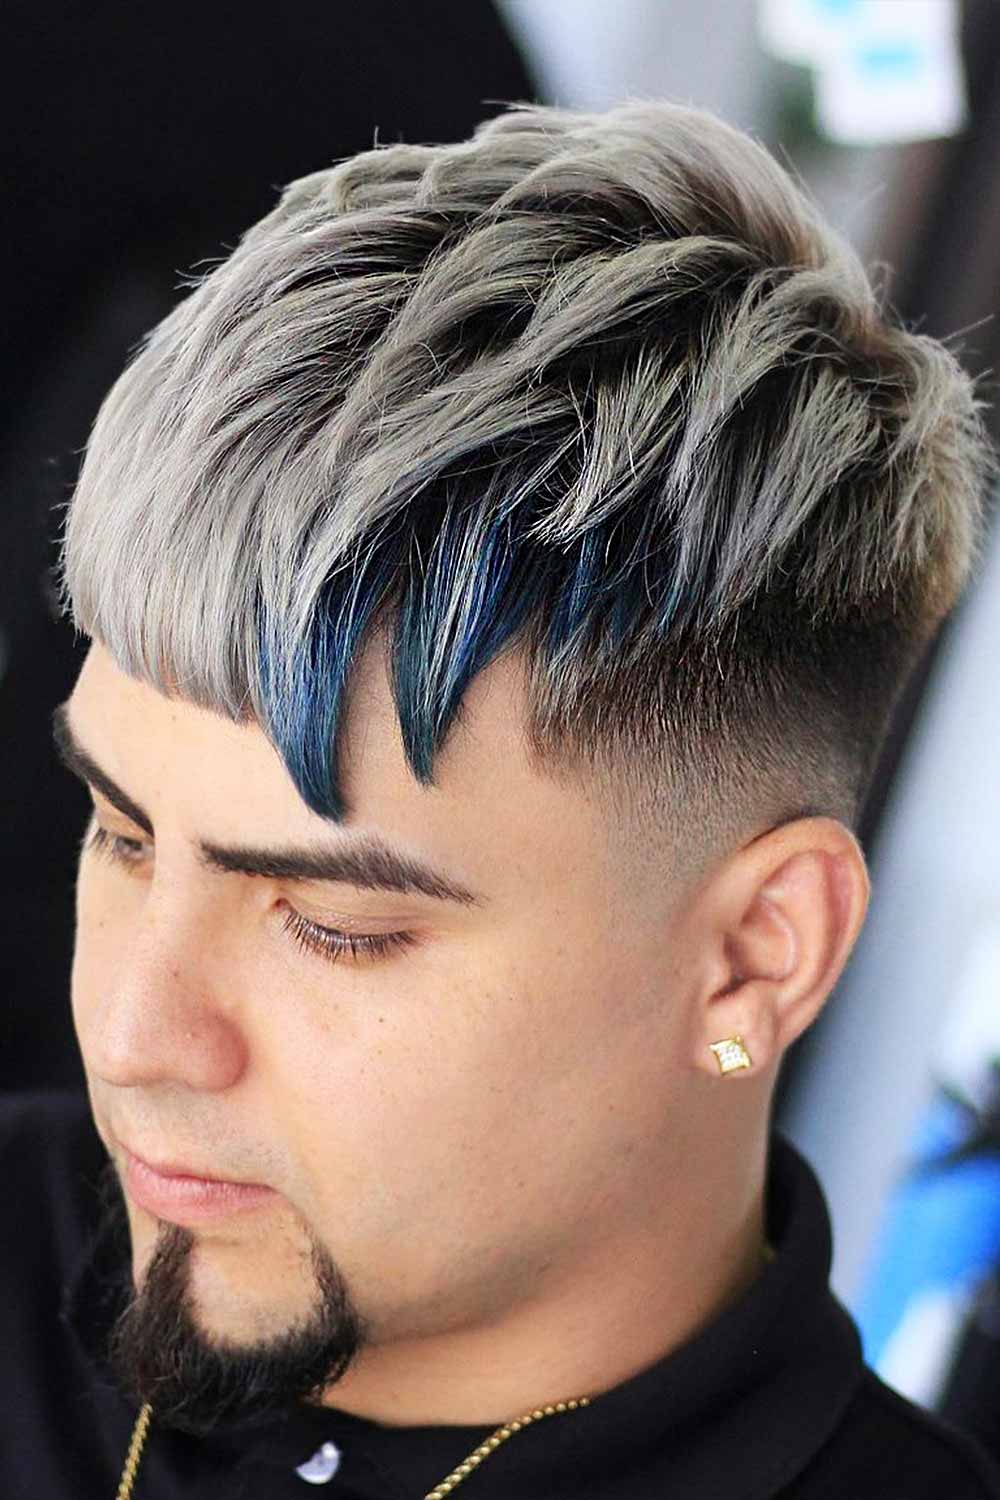 Pastel is the New Trending Tone for Men's Hair Colour